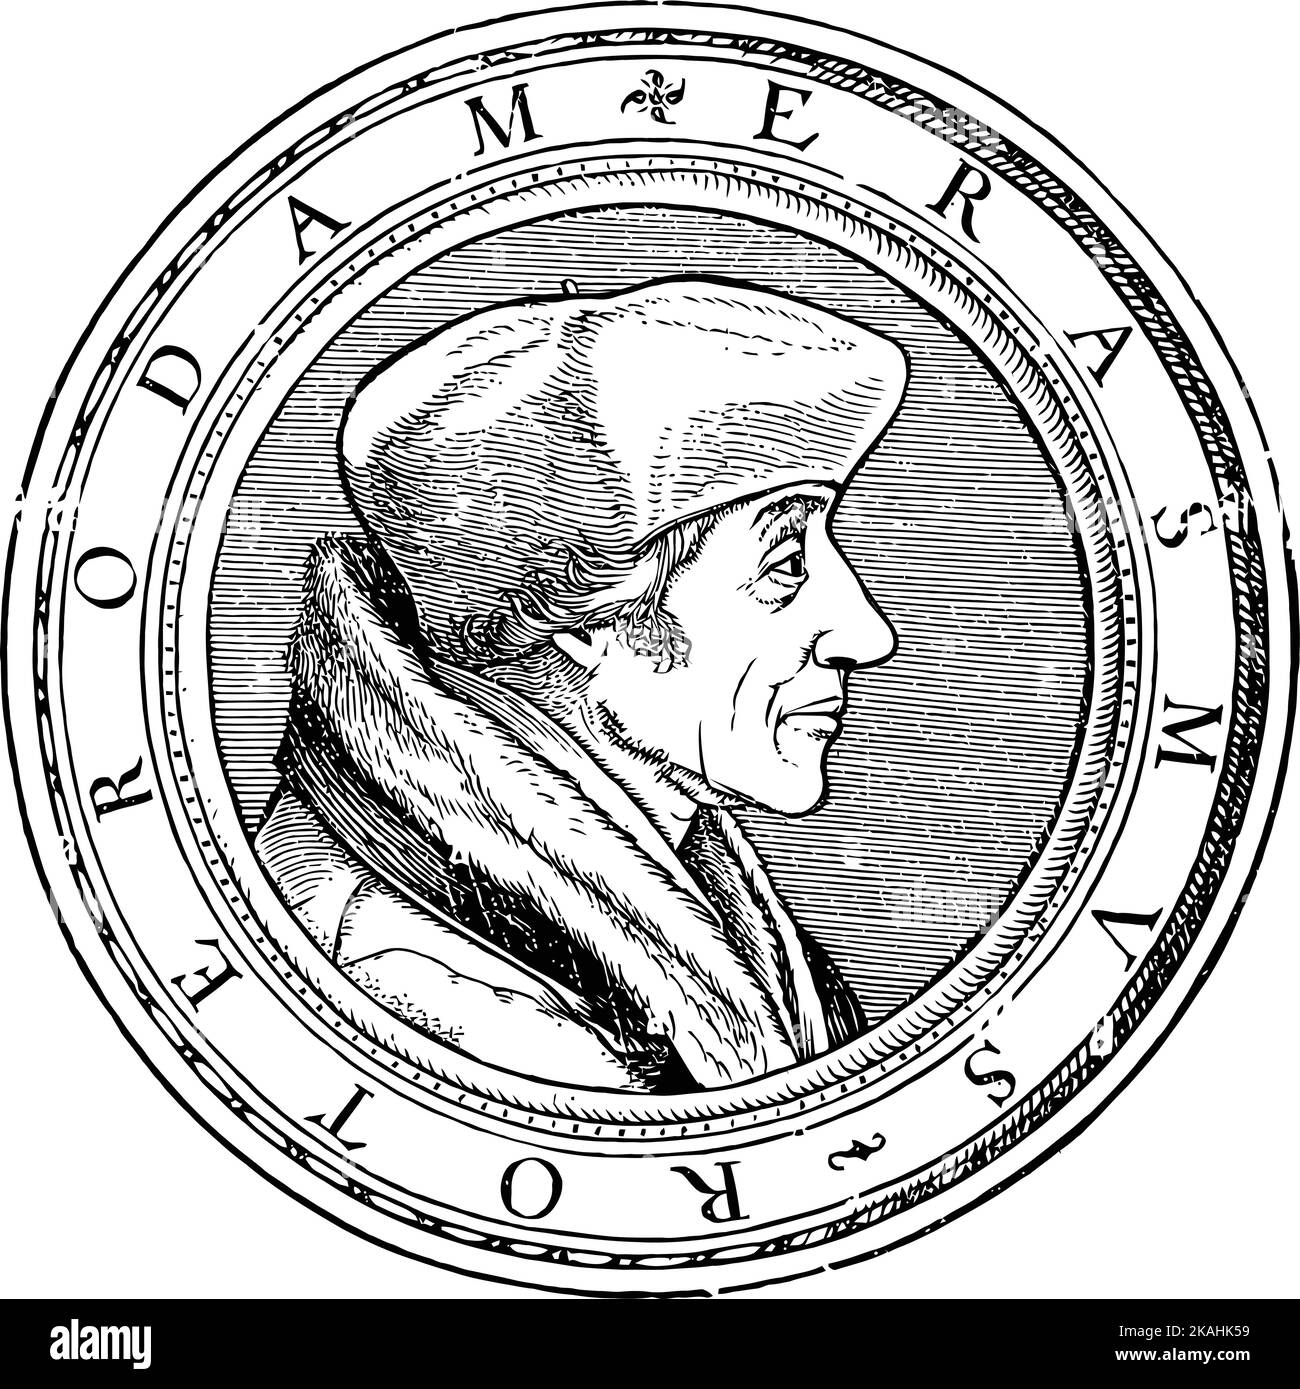 Portrait of Desiderius Erasmus Roterodamus, known as Erasmus or Erasmus of Rotterdam, was a Dutch Christian humanist who was the greatest scholar of t Stock Vector